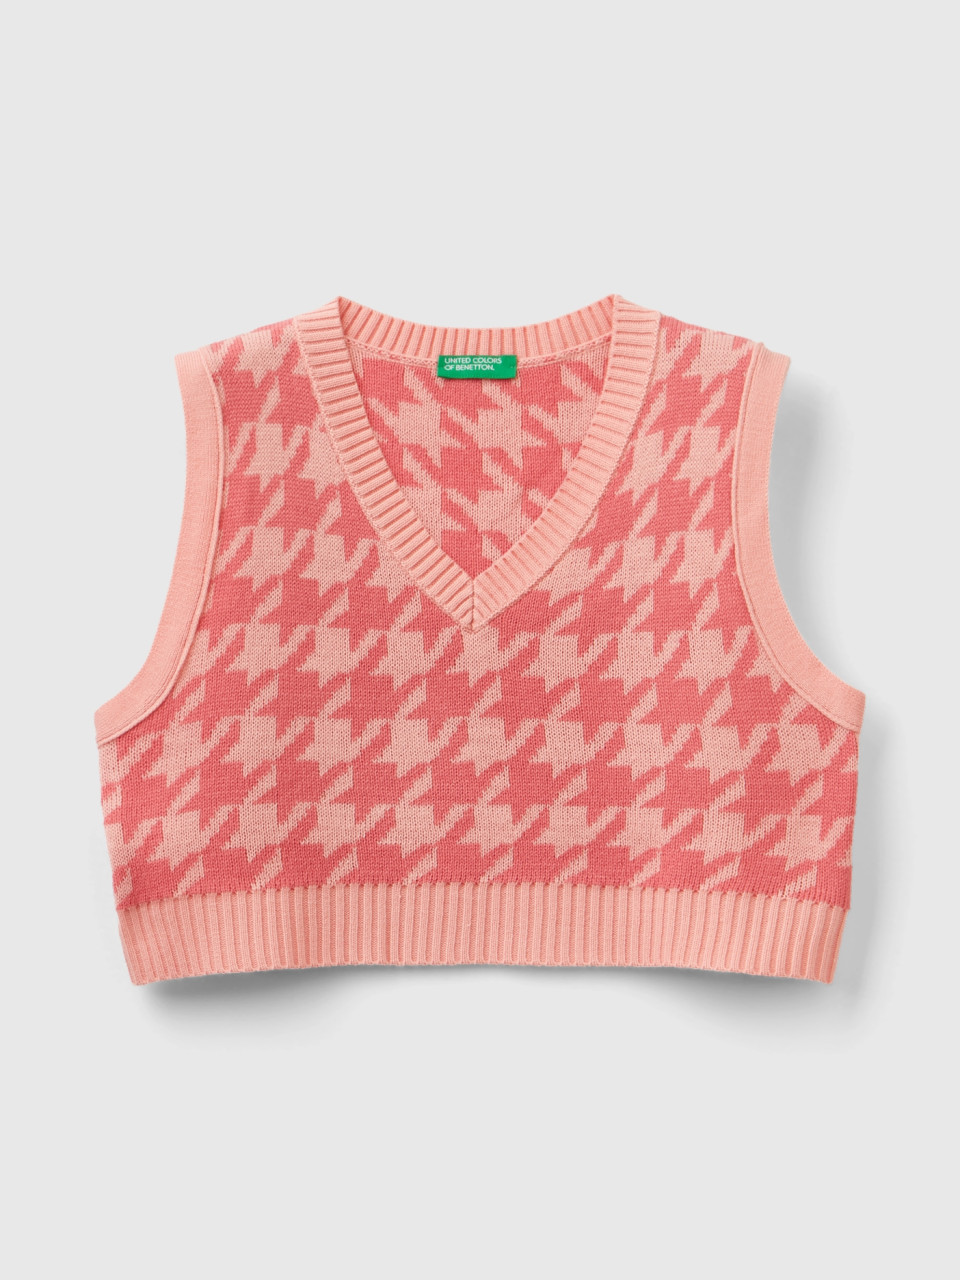 Benetton, Cropped Houndstooth Vest, Pink, Kids